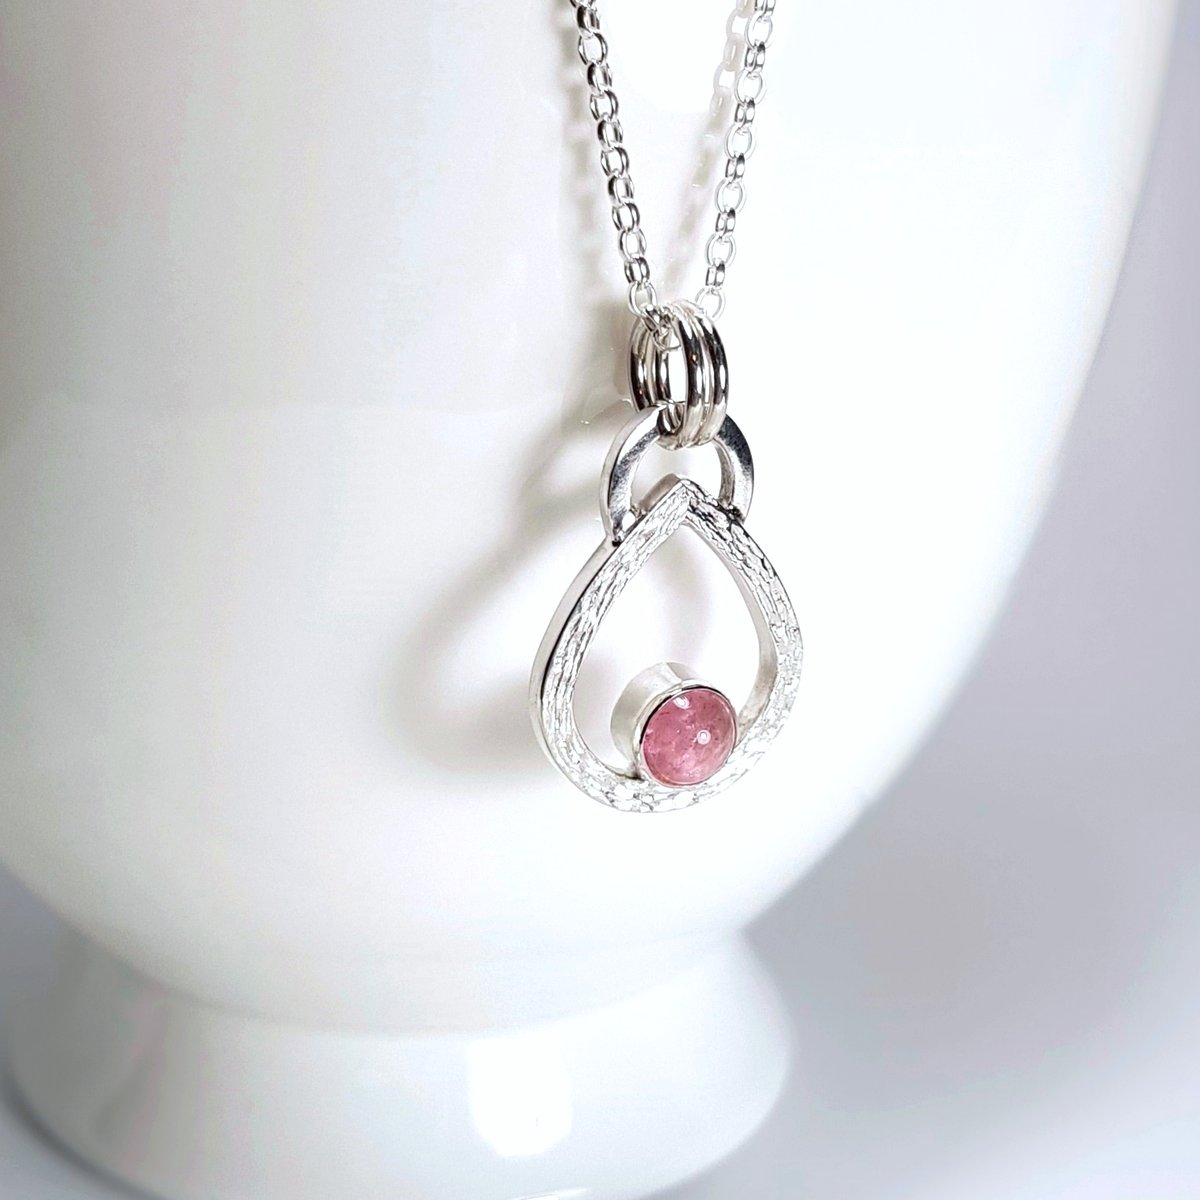 Image of Pink Tourmaline Teardrop Necklace, Solid Sterling Silver Pendant, Handmade Recycled Silver Jewellery